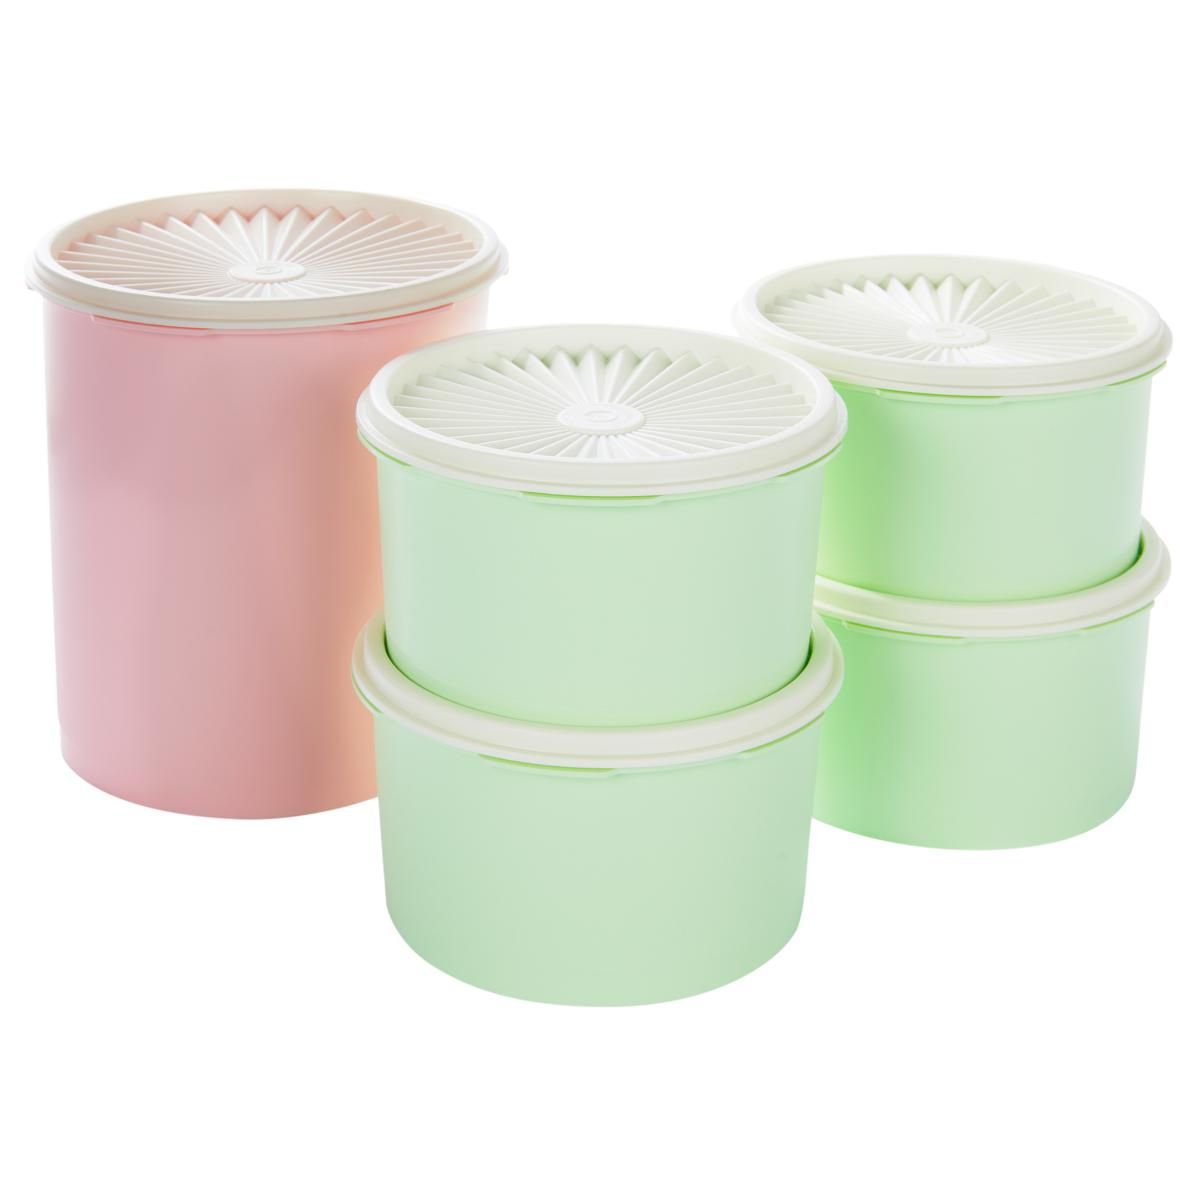 Tupperware 10-piece Heritage Canister Set | HSN